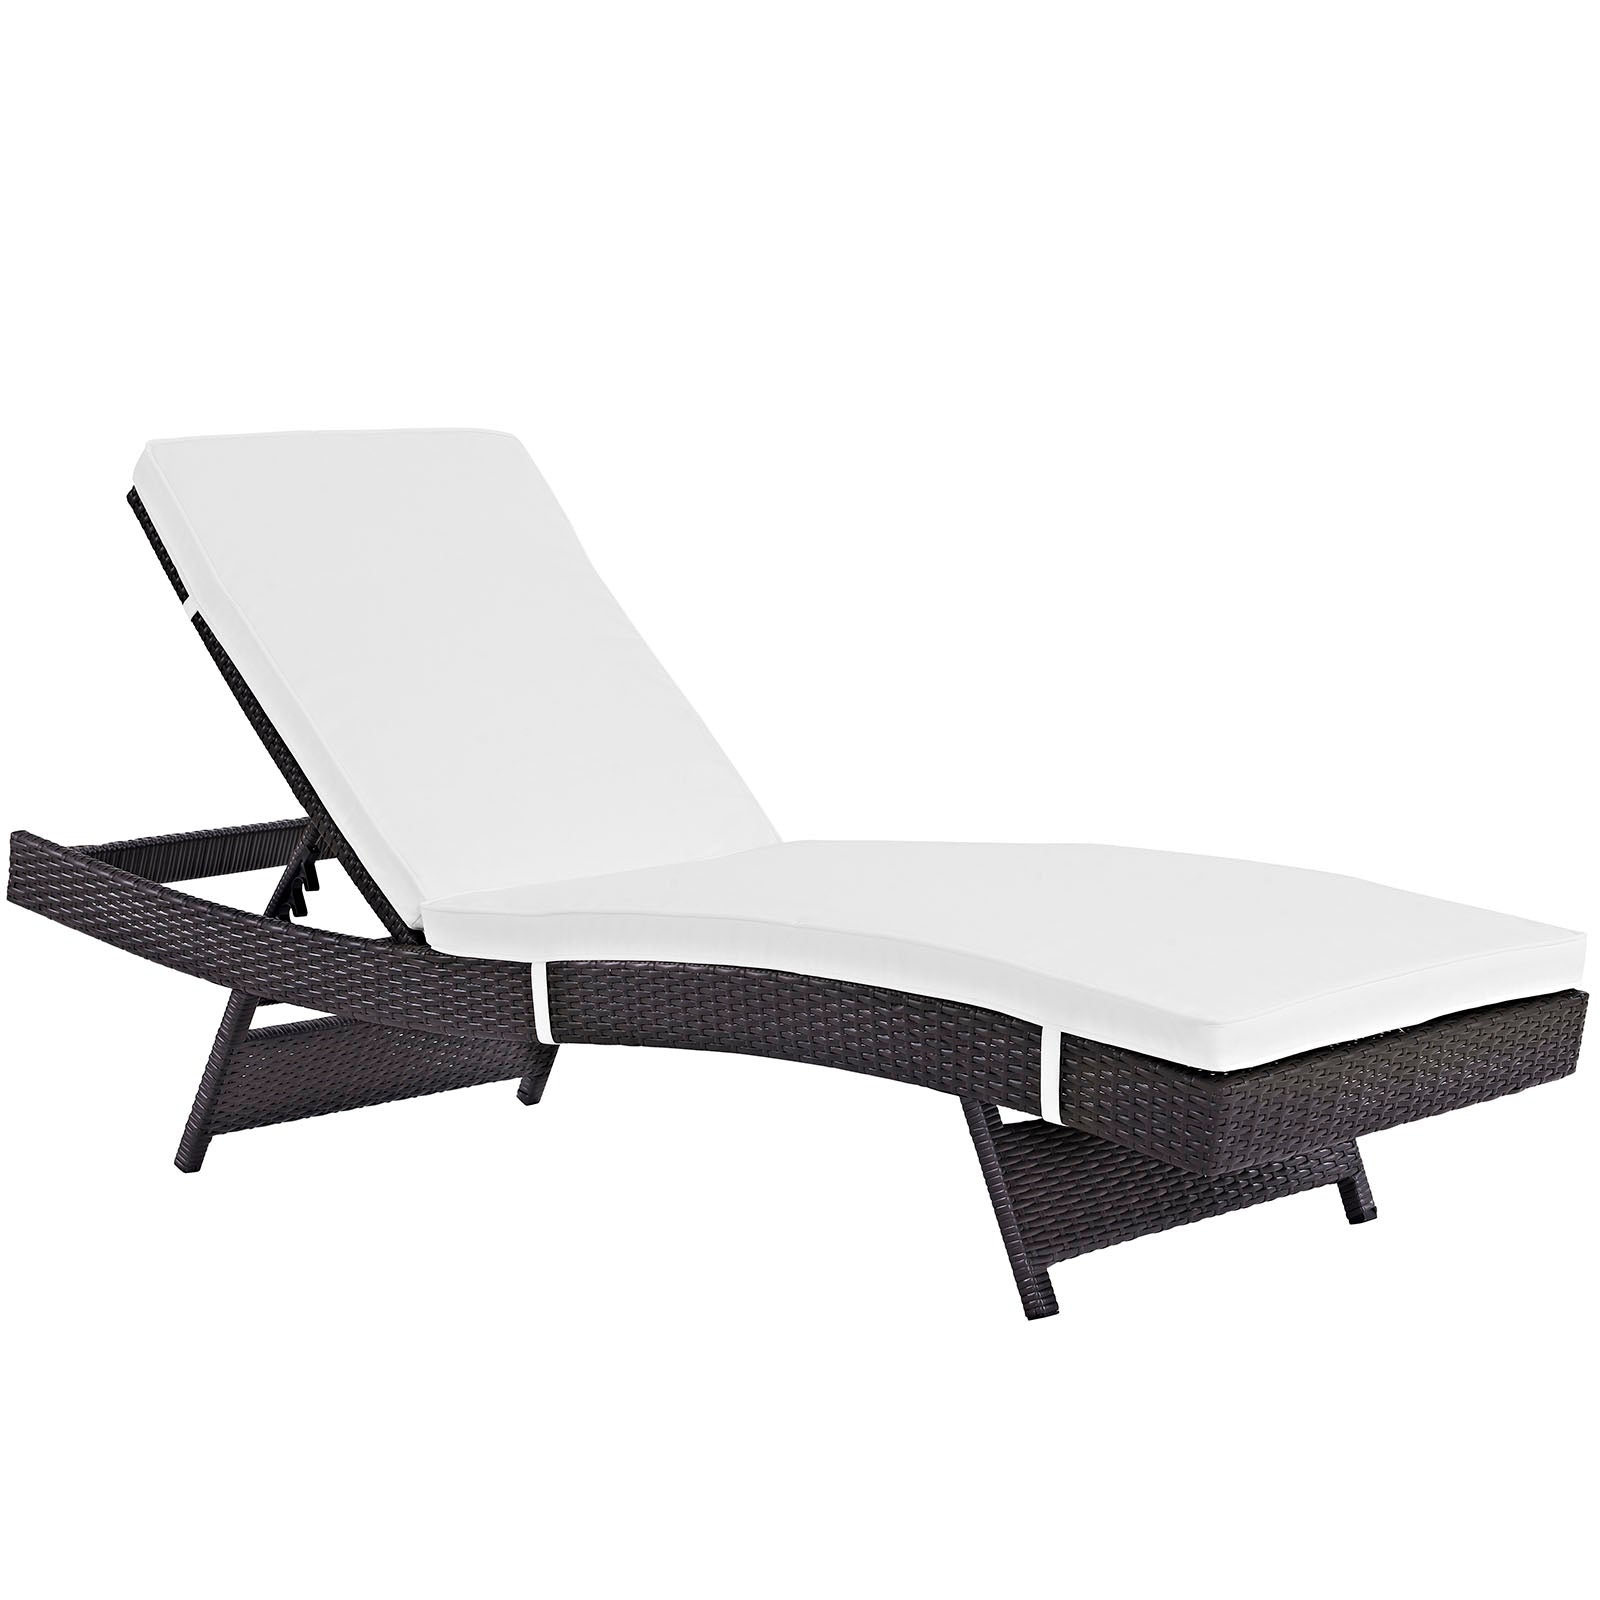 Convene Chaise Outdoor Patio Set of 6 - East Shore Modern Home Furnishings